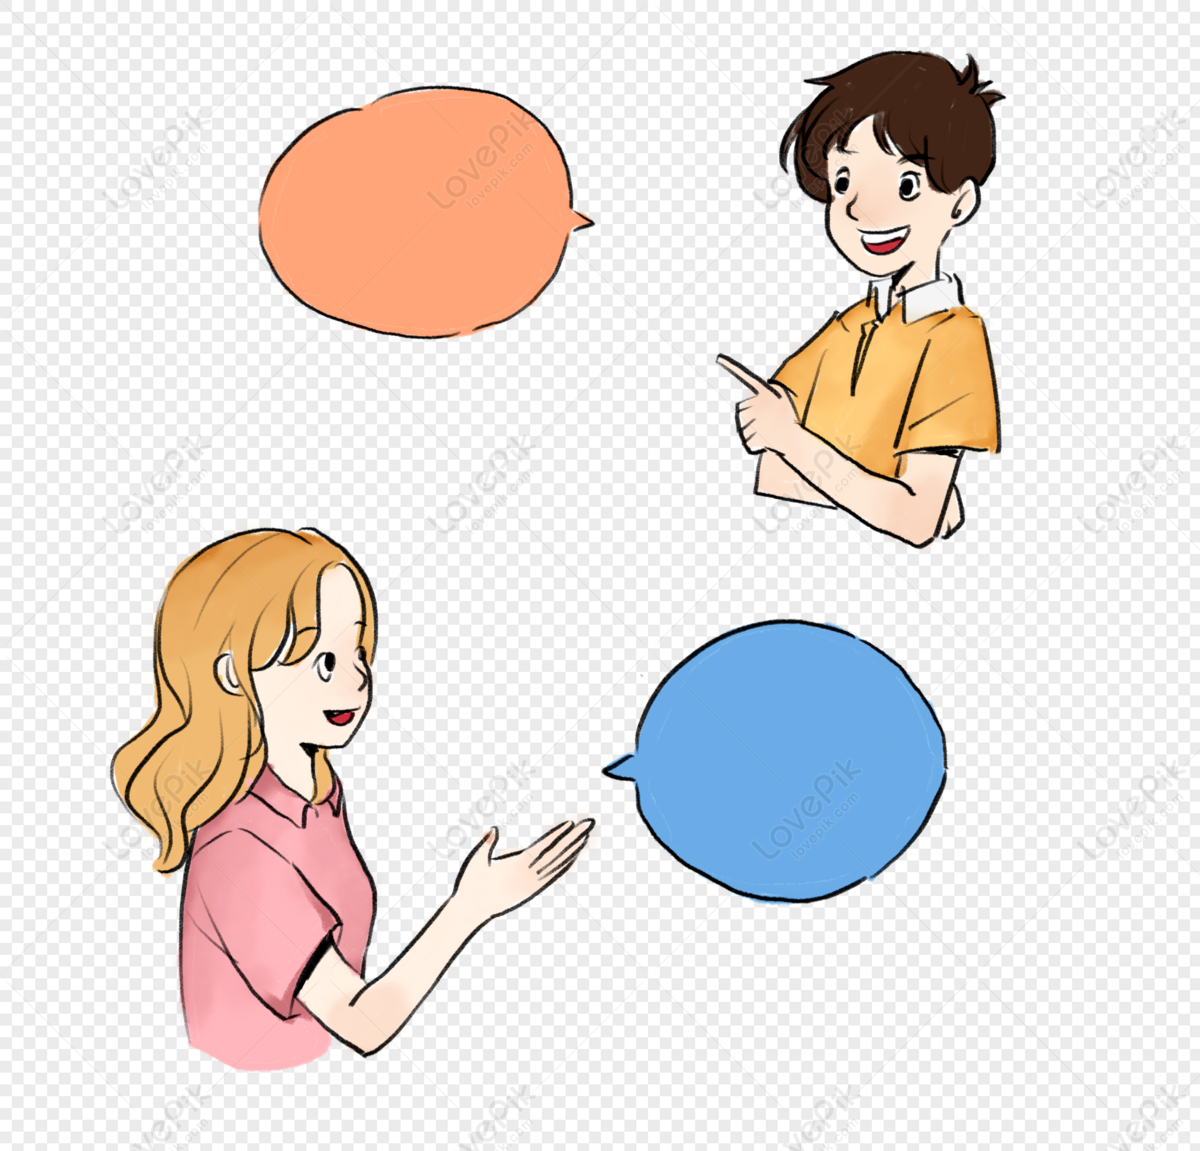 asking questions clipart